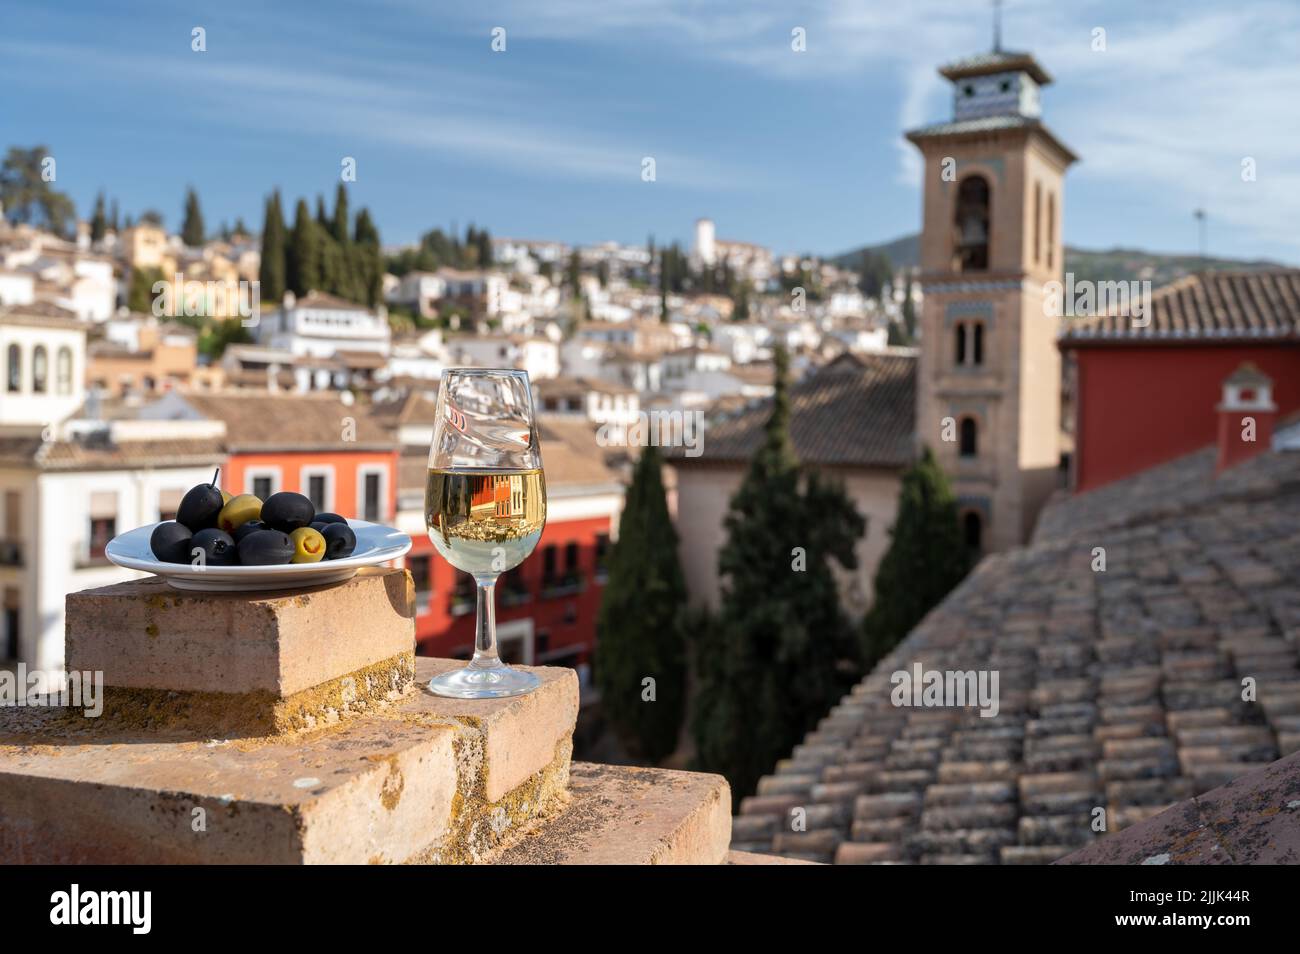 Tasting of Spanish sweet and dry fortified Vino de Jerez sherry wine and olives with view on roofs and houses of old andalusian town, South of Spain Stock Photo